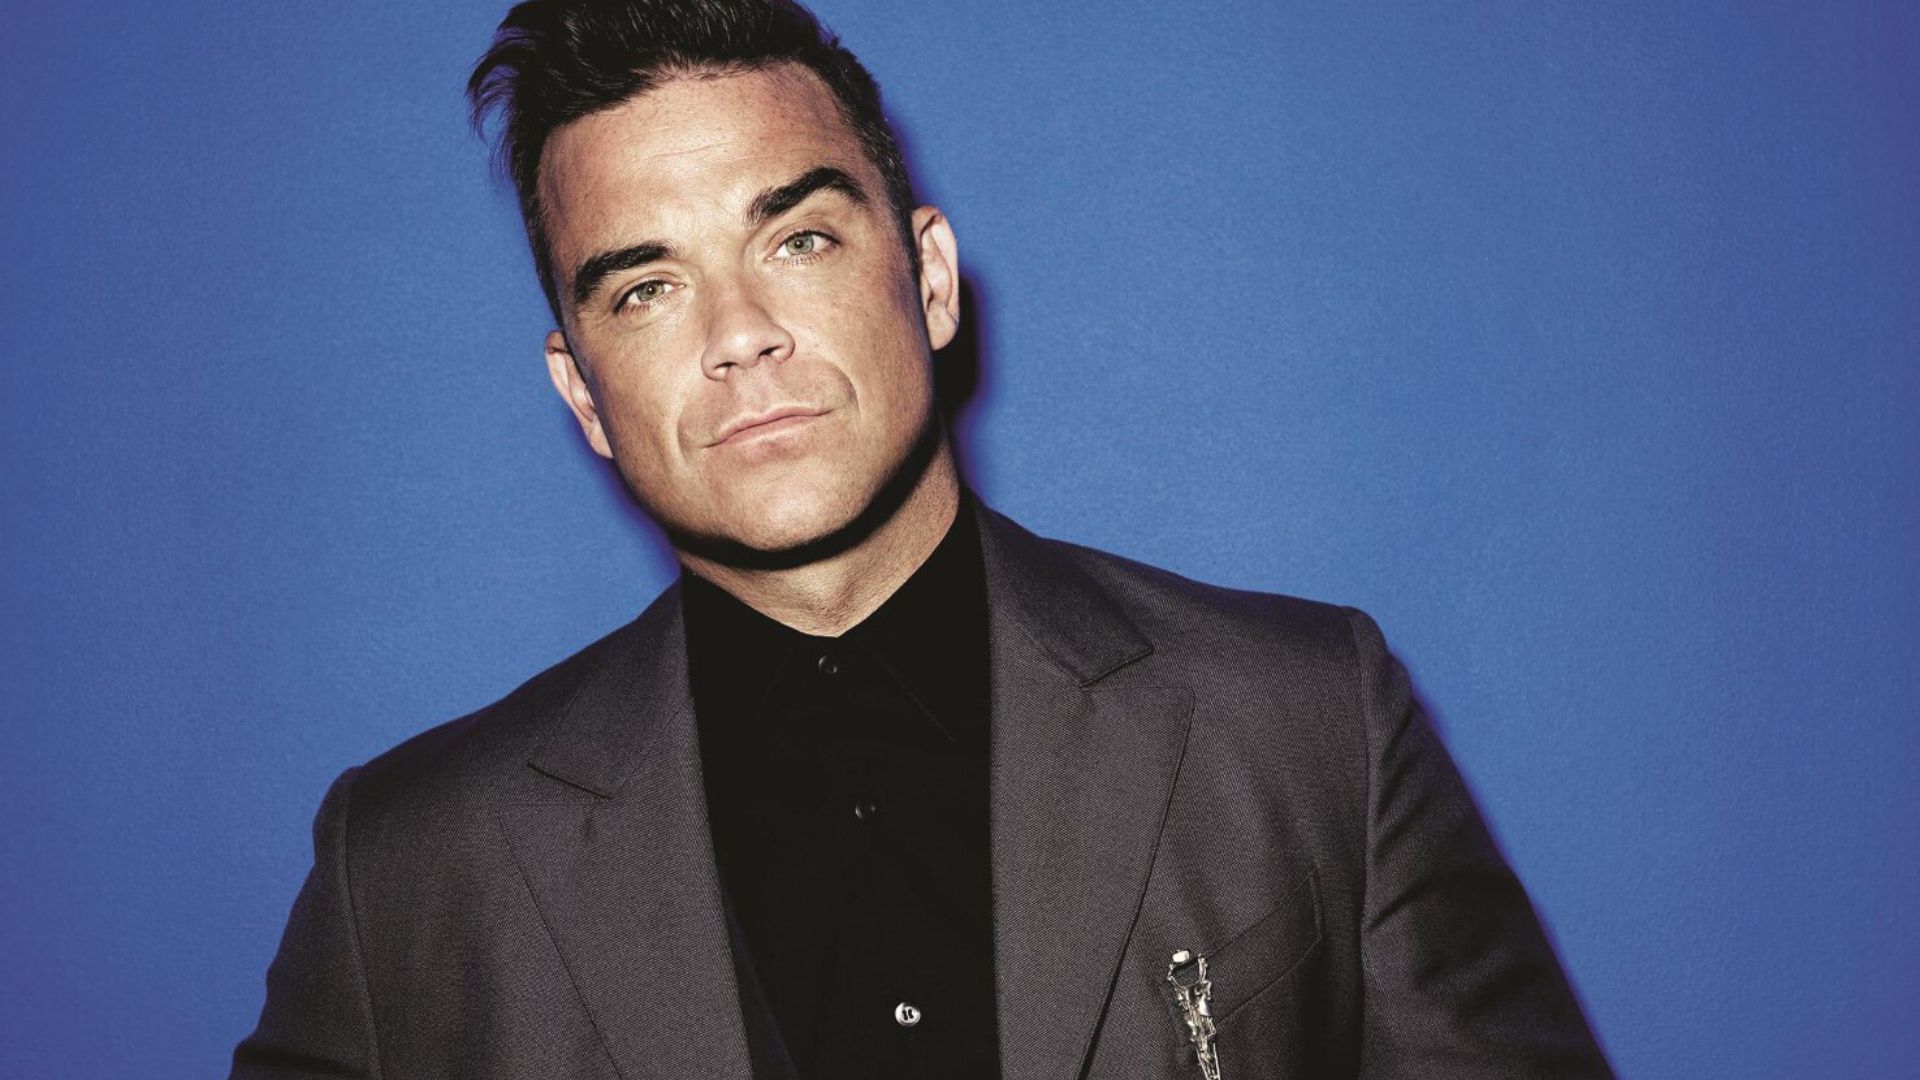 Robbie Williams' 'planning to release debut album with electronic group Lufthaus' - RETROPOP - Fashionably Nostalgic | News, Interviews, Reviews, and more...